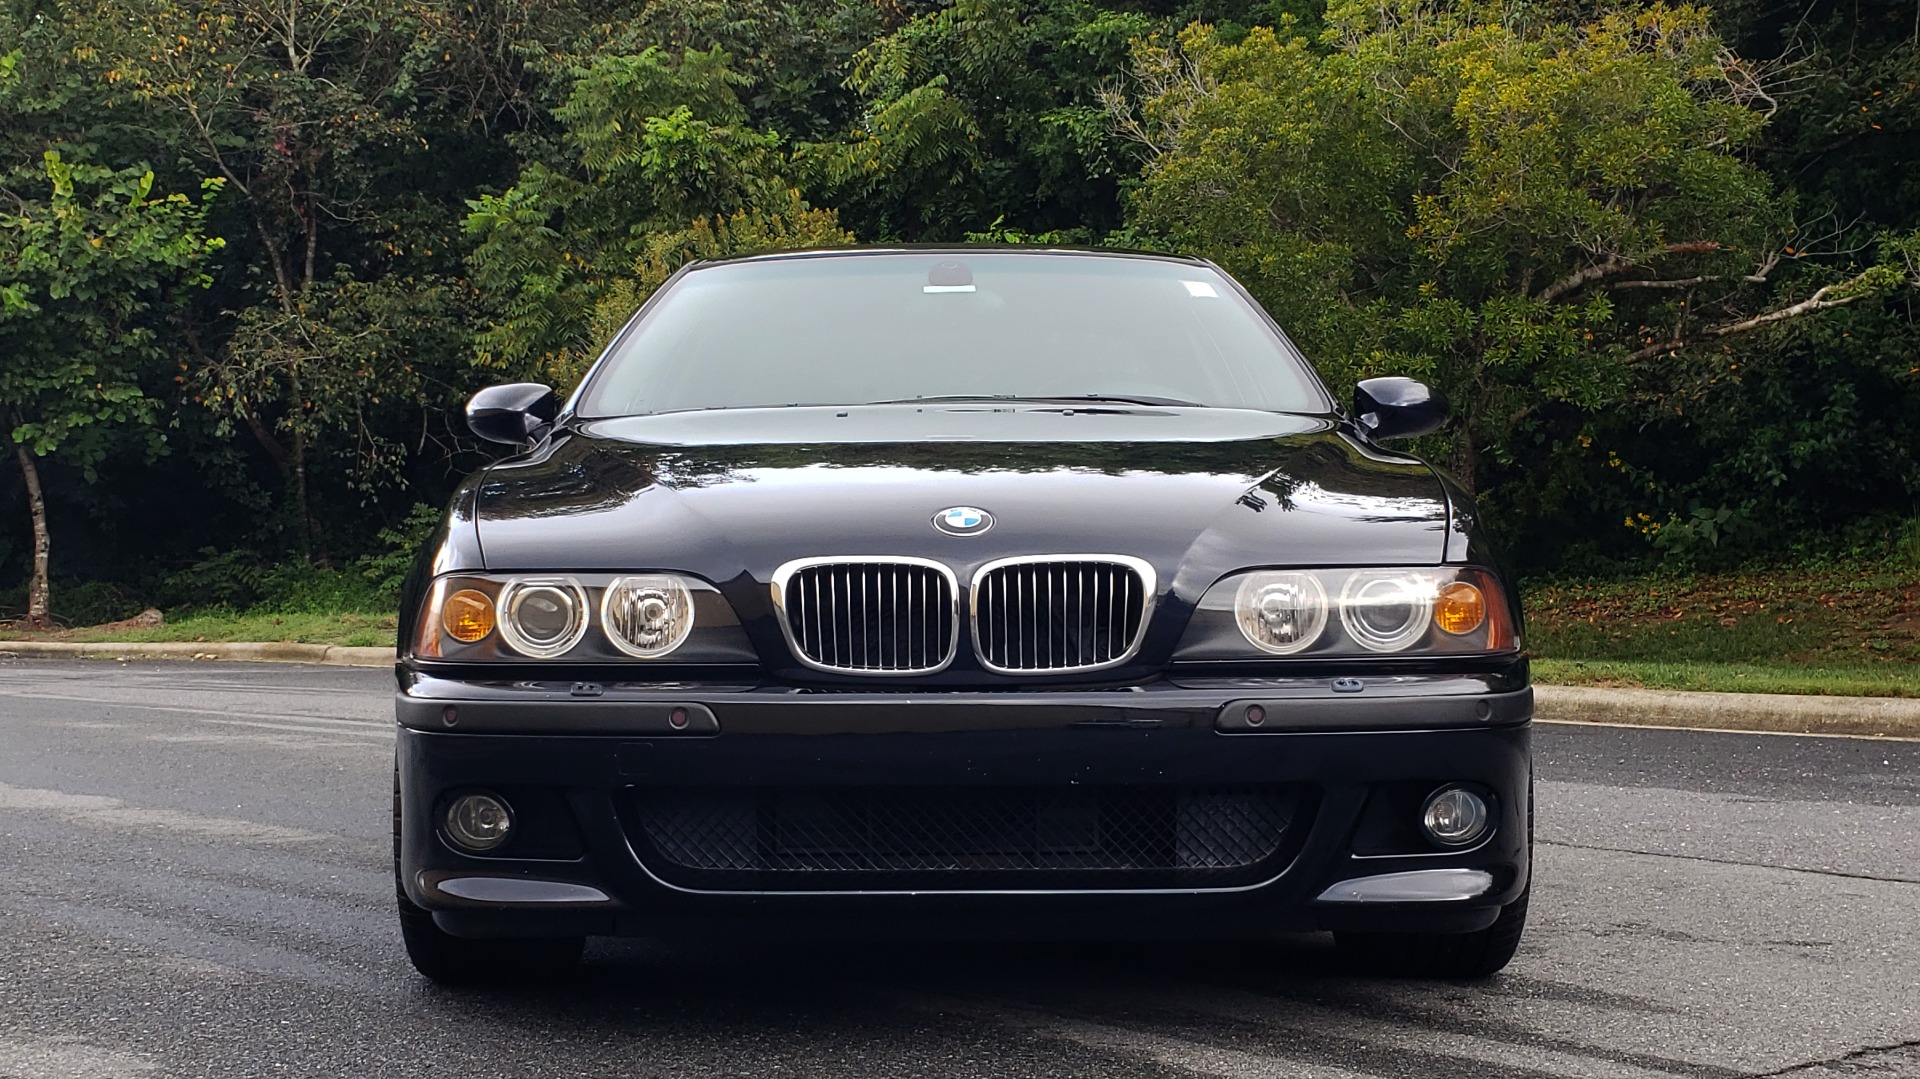 Used 2003 BMW 5 SERIES M5 / 6-SPD MAN / NAV / PARK DIST CNTRL / PREM SND / SUNROOF for sale Sold at Formula Imports in Charlotte NC 28227 25